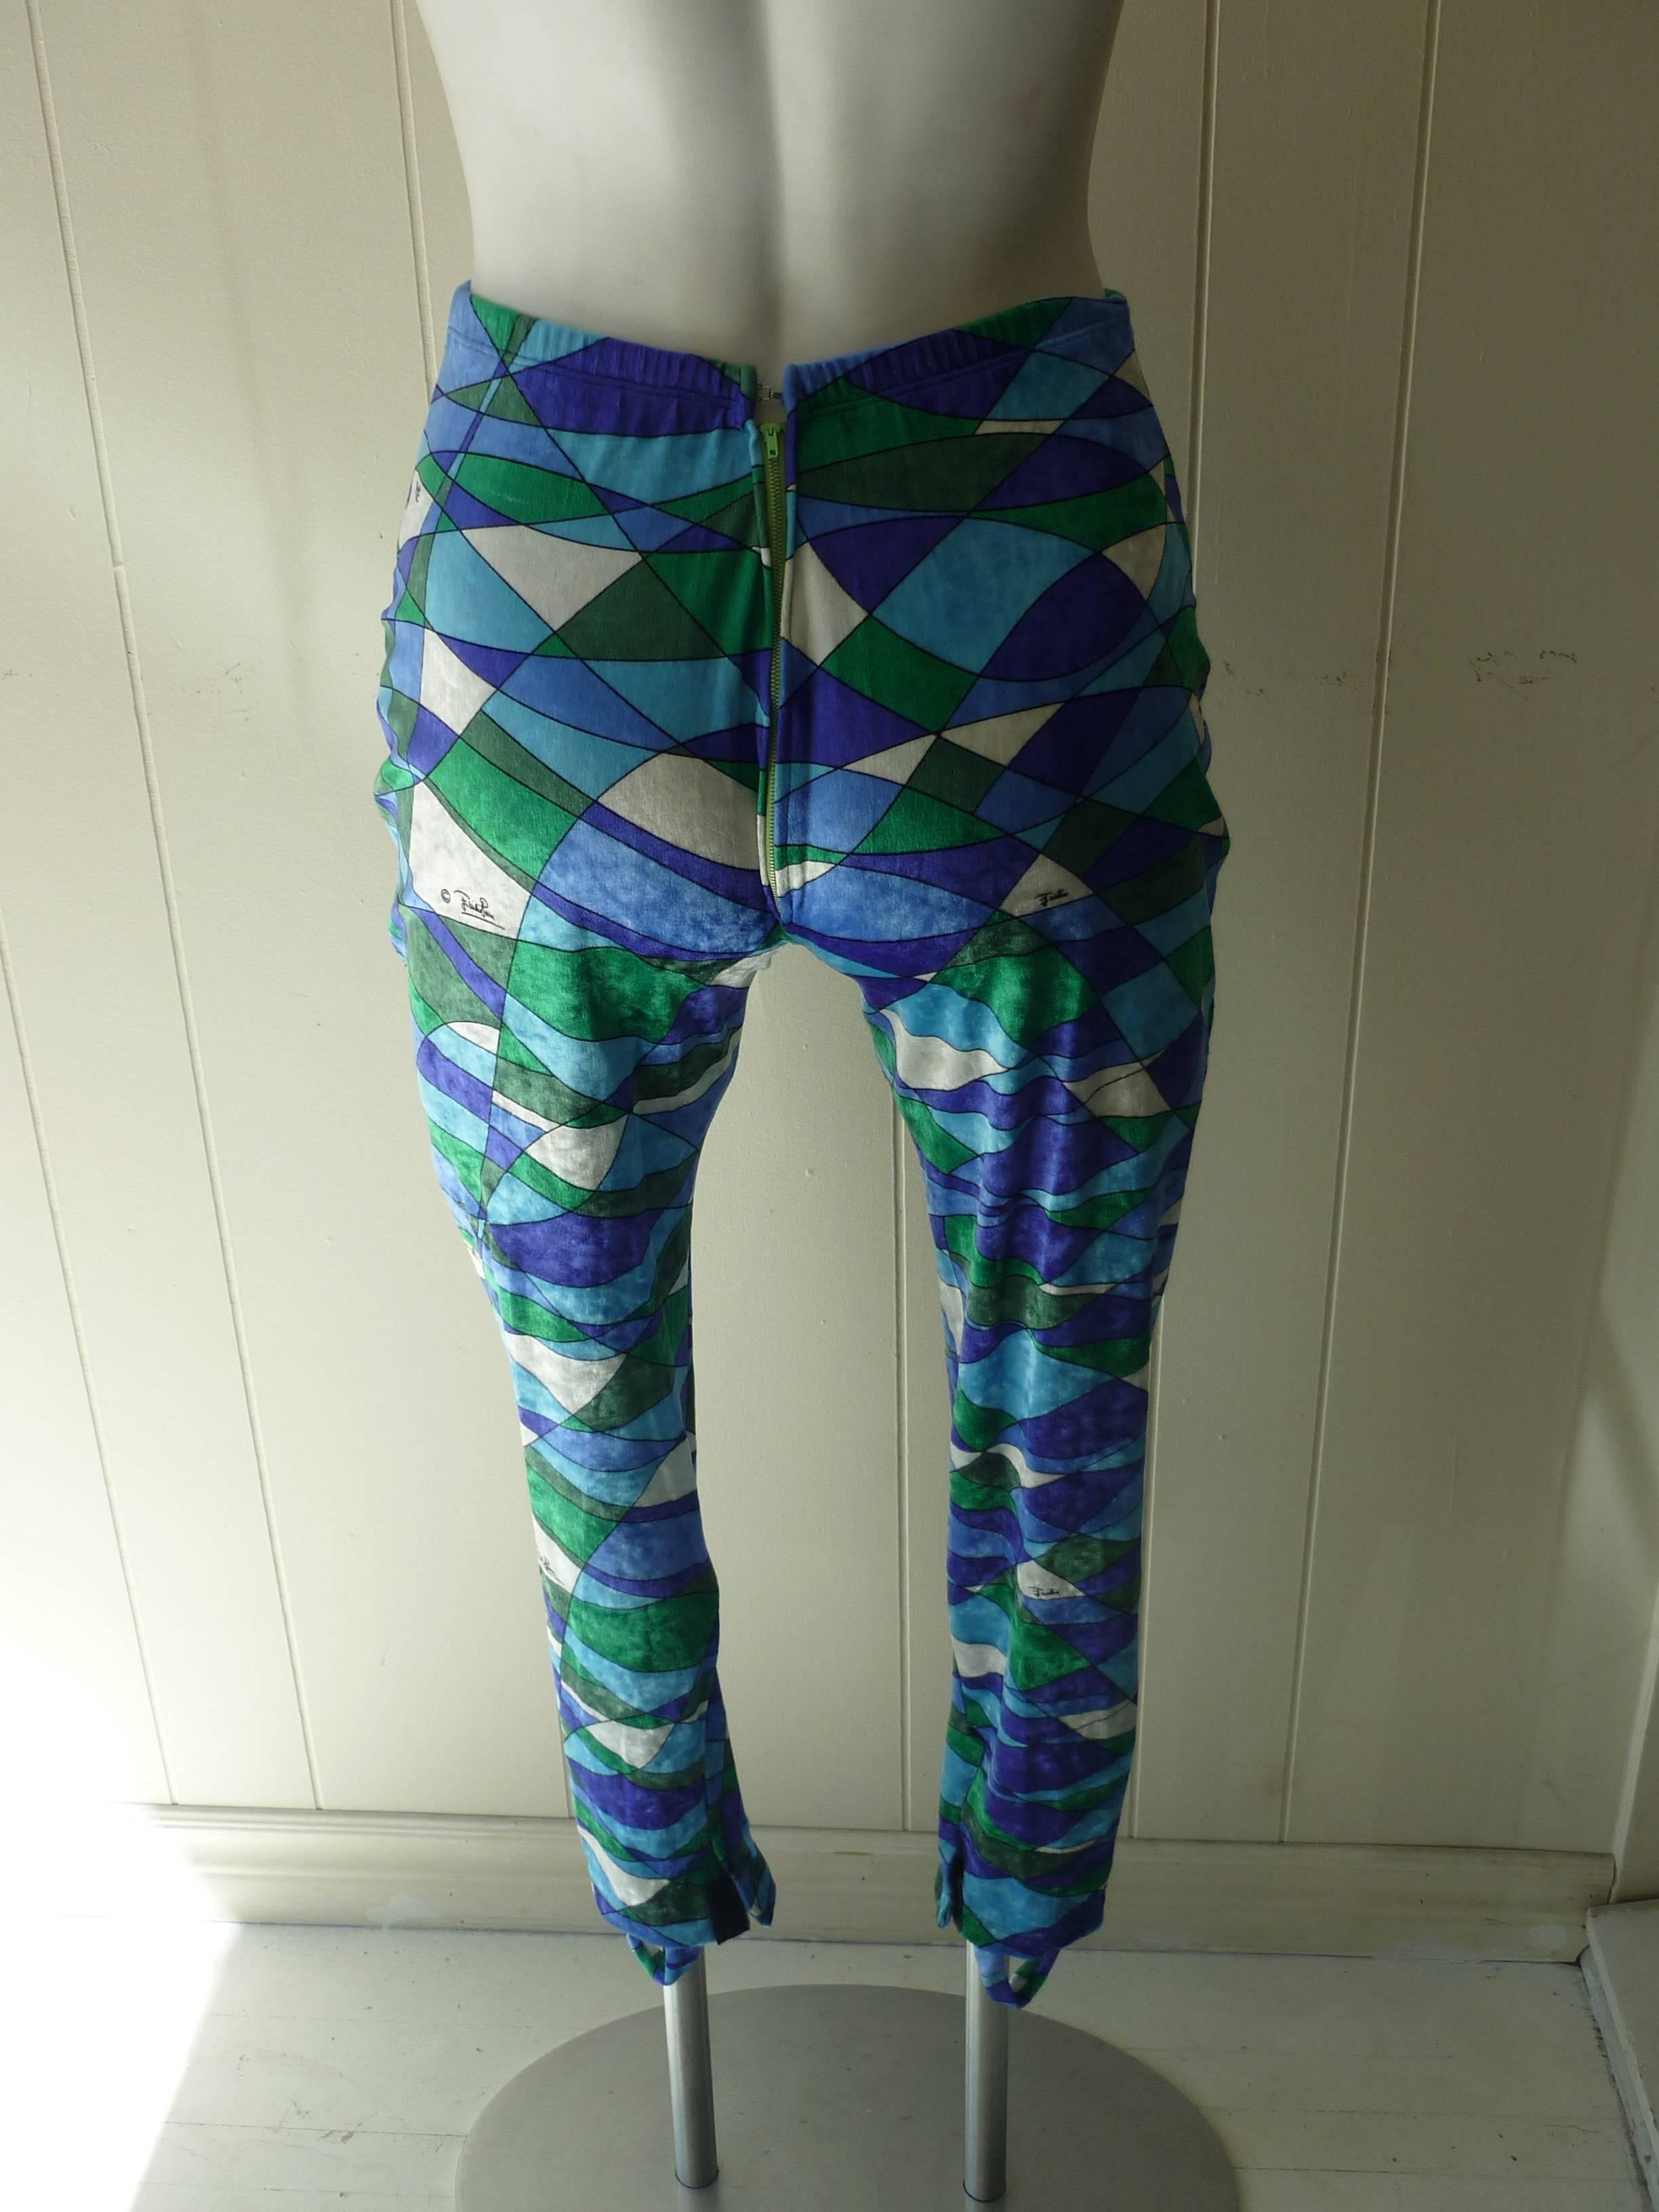 This is a signature printed harlequin patterned pair of Emilio Pucci velour leggings with stirrup straps and velcro closure at bottom.

Although the size marked is L it is smaller. Please look at the measurements, and there is some stretch